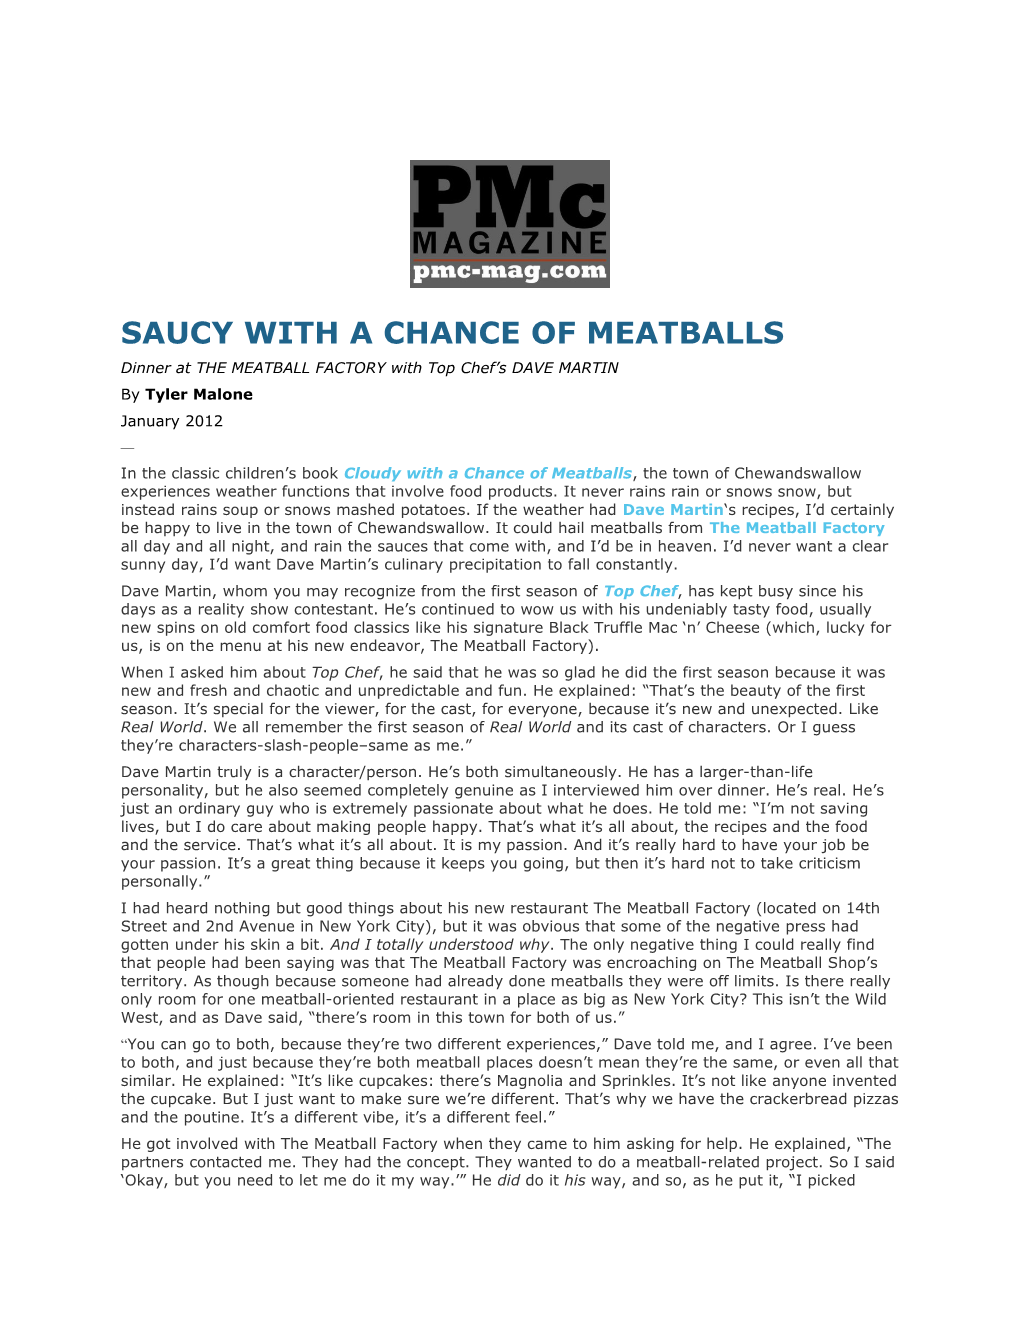 Saucy with a Chance of Meatballs